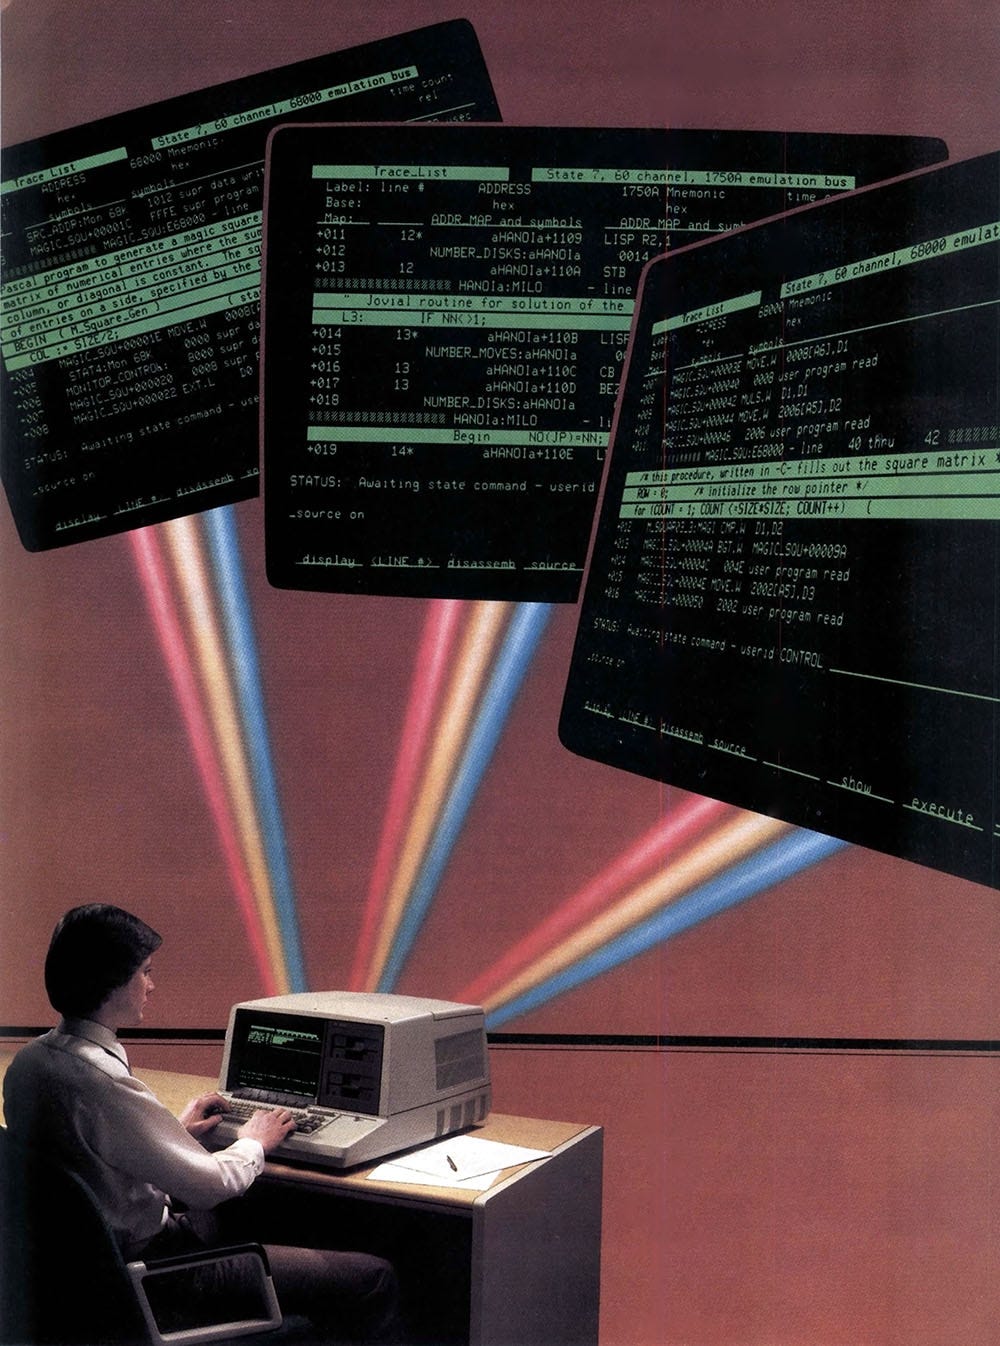  HP, Advertisement for The HP 64000 Logic Development System in Computer Design magazine.